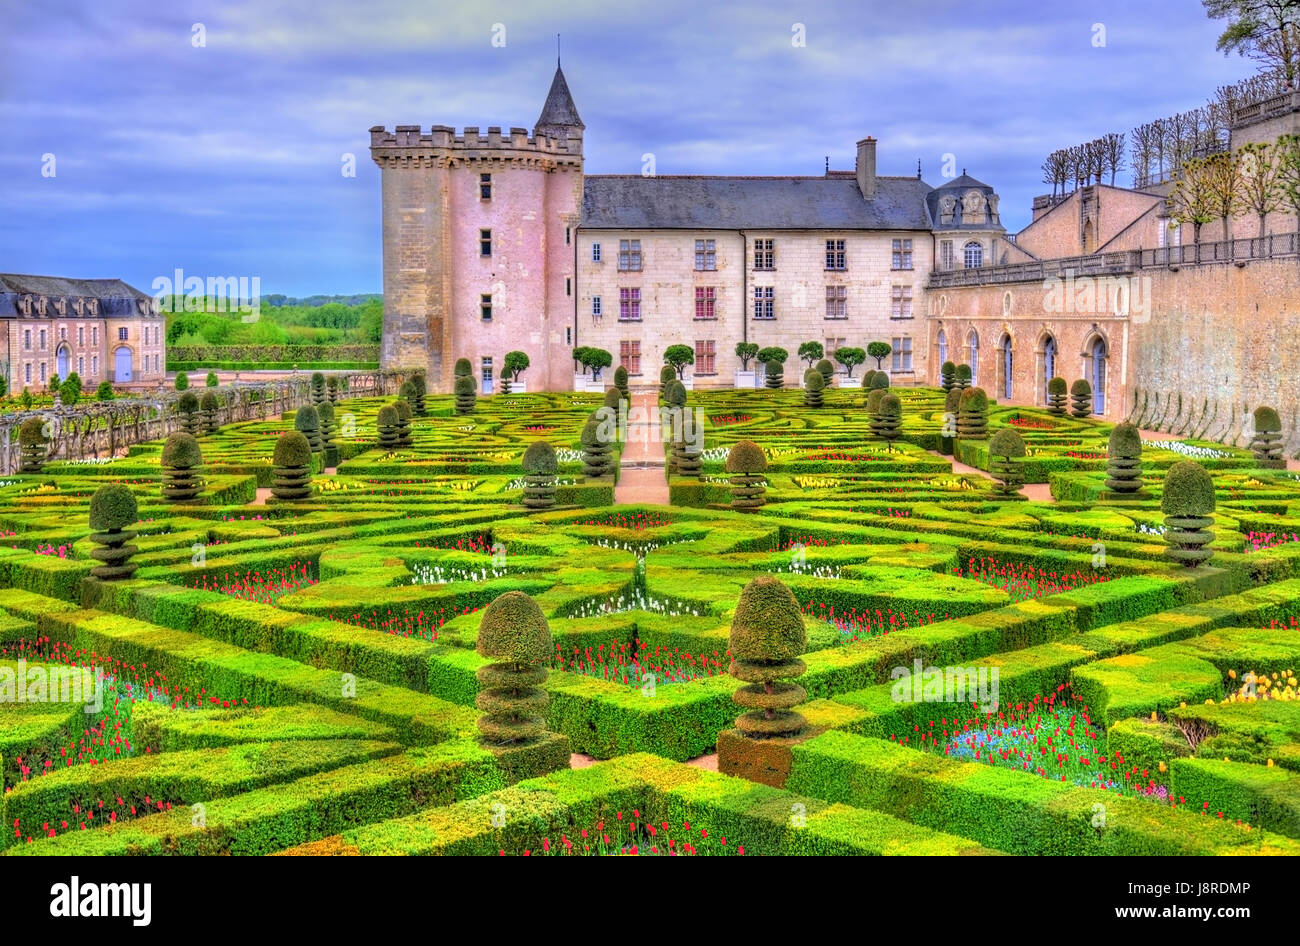 Chateau de Villandry with its garden - the Loire Valley, France Stock Photo